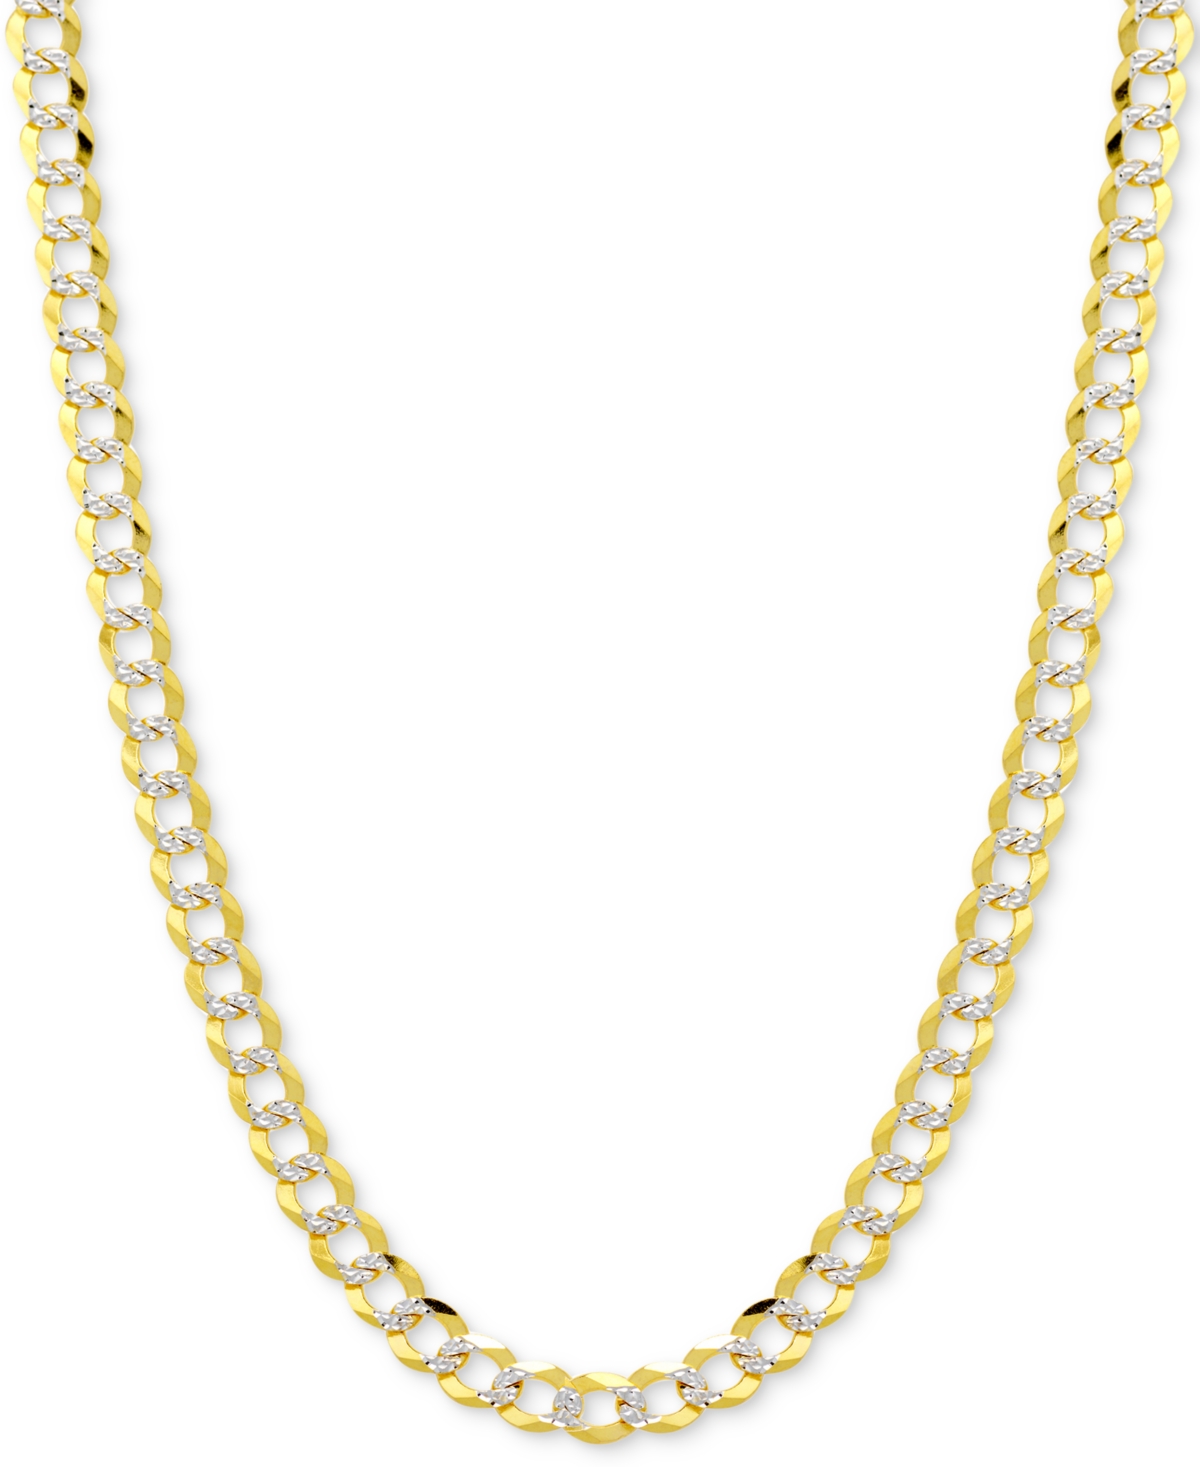 Italian Gold 20" Two-tone Open Curb Chain Necklace In Solid 14k Gold & White Gold In Two Tone